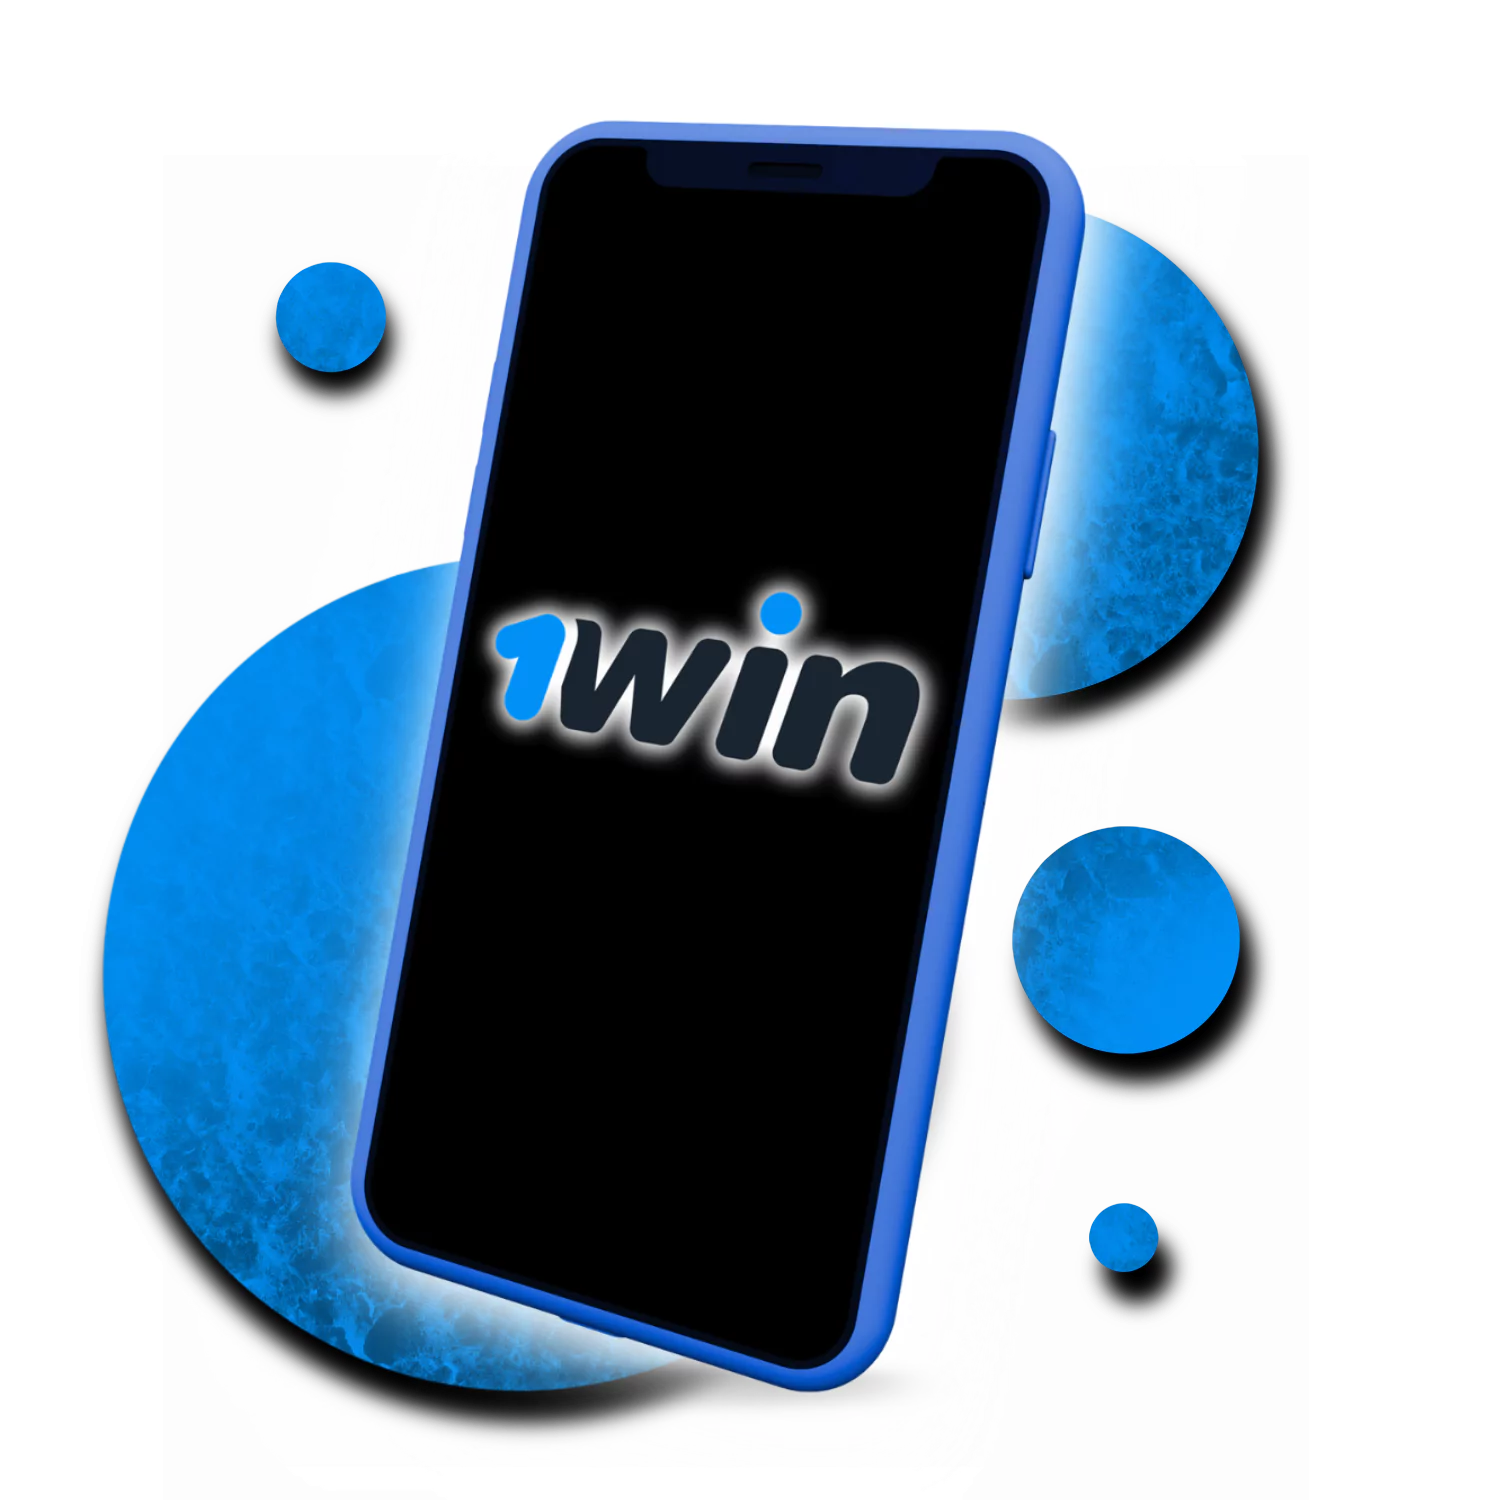 Learn about how to download and install the 1Win app for Android and iOS.